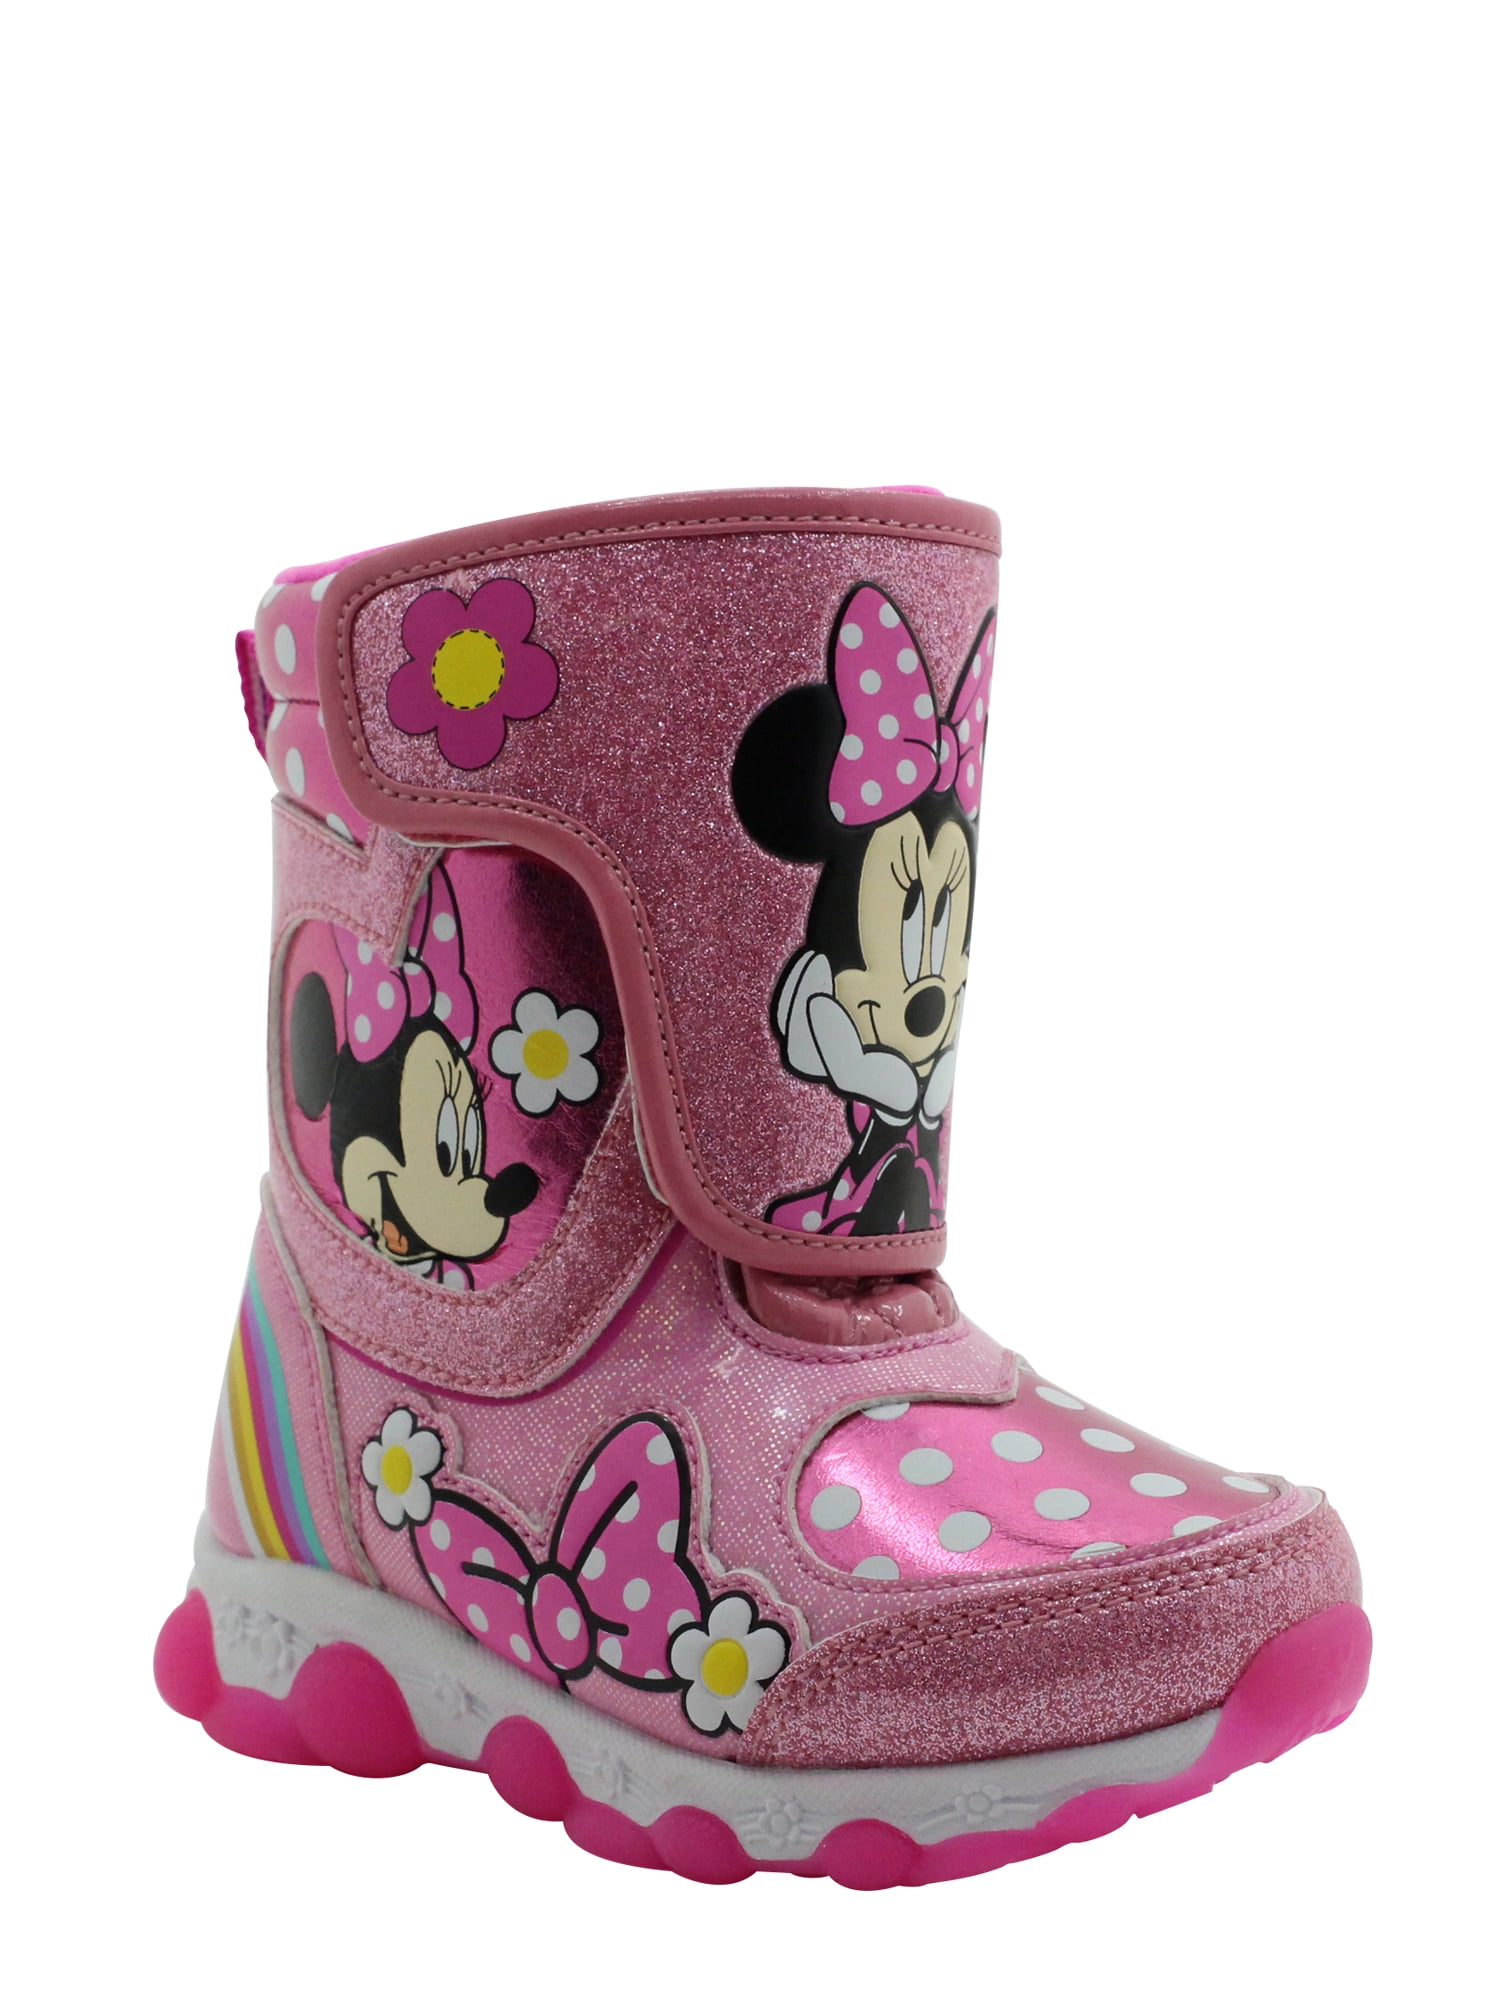 Disney Minnie Mouse Light-up Insulated 